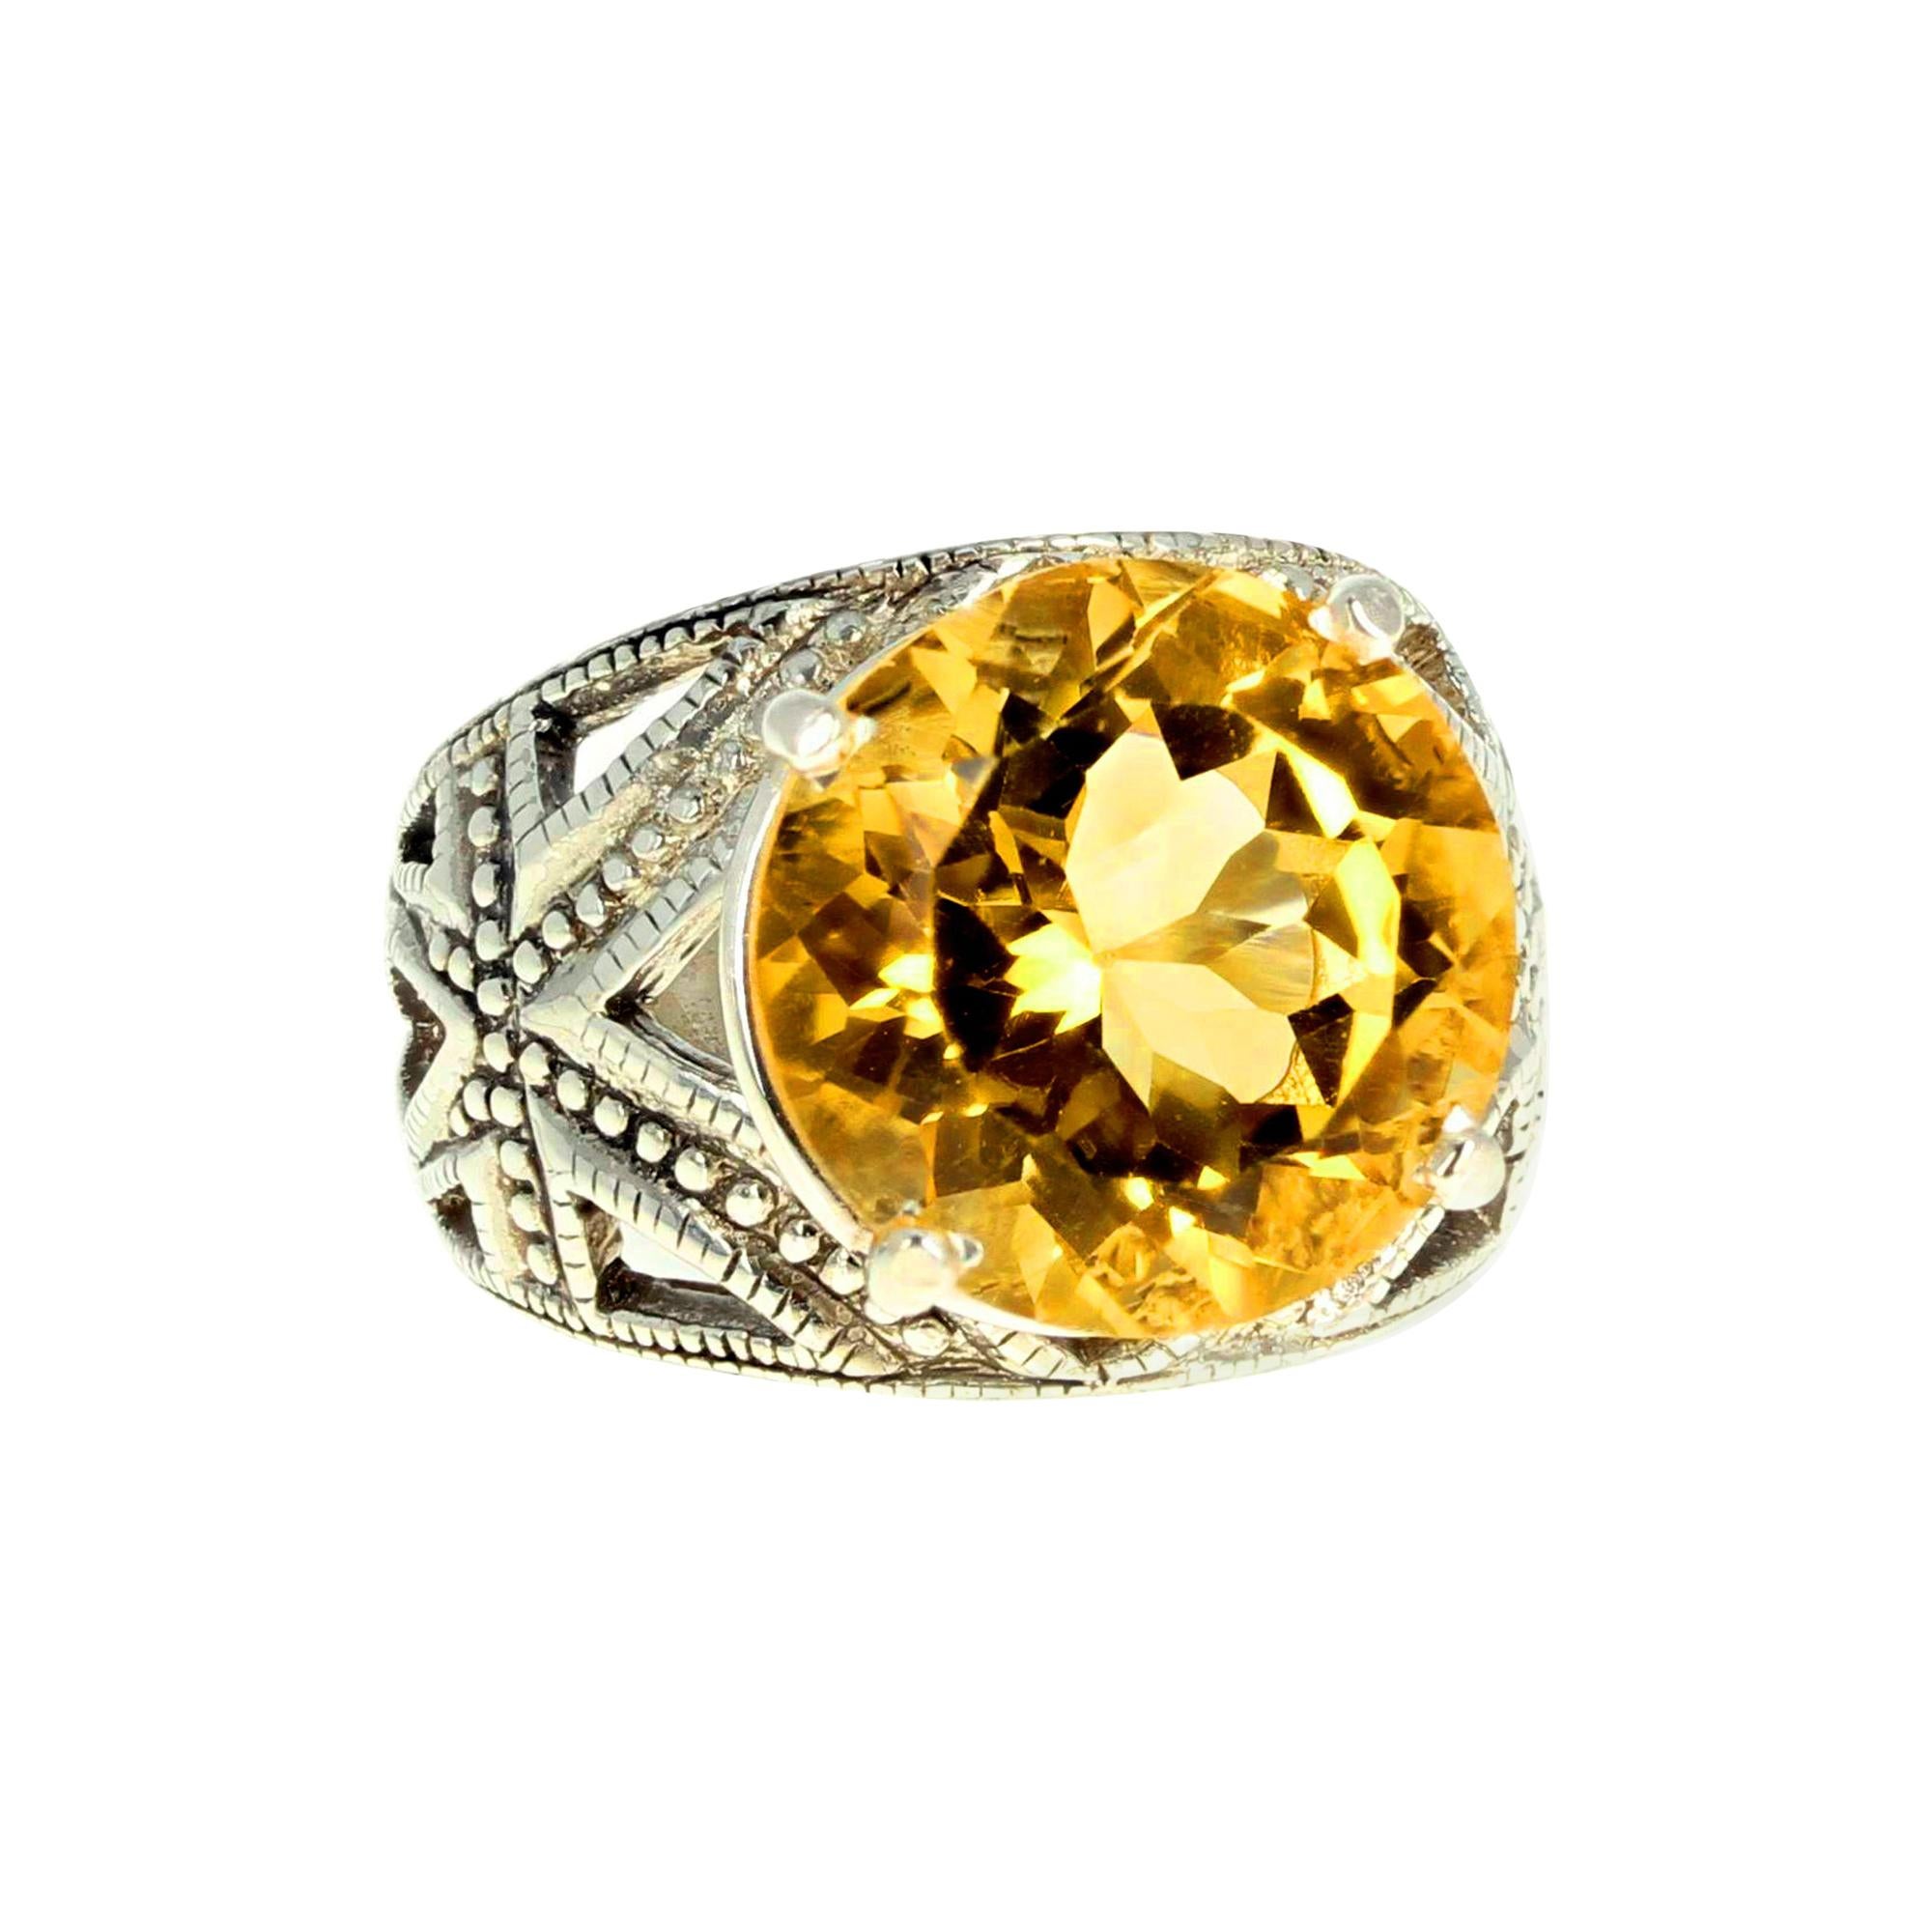 This brilliantly glittering 9.1 carat natural yellow Citrine is set in a sterling silver ring size 7 (sizable for free).  This fascinating beautiful special cut make it glitter more than most gemstones.  